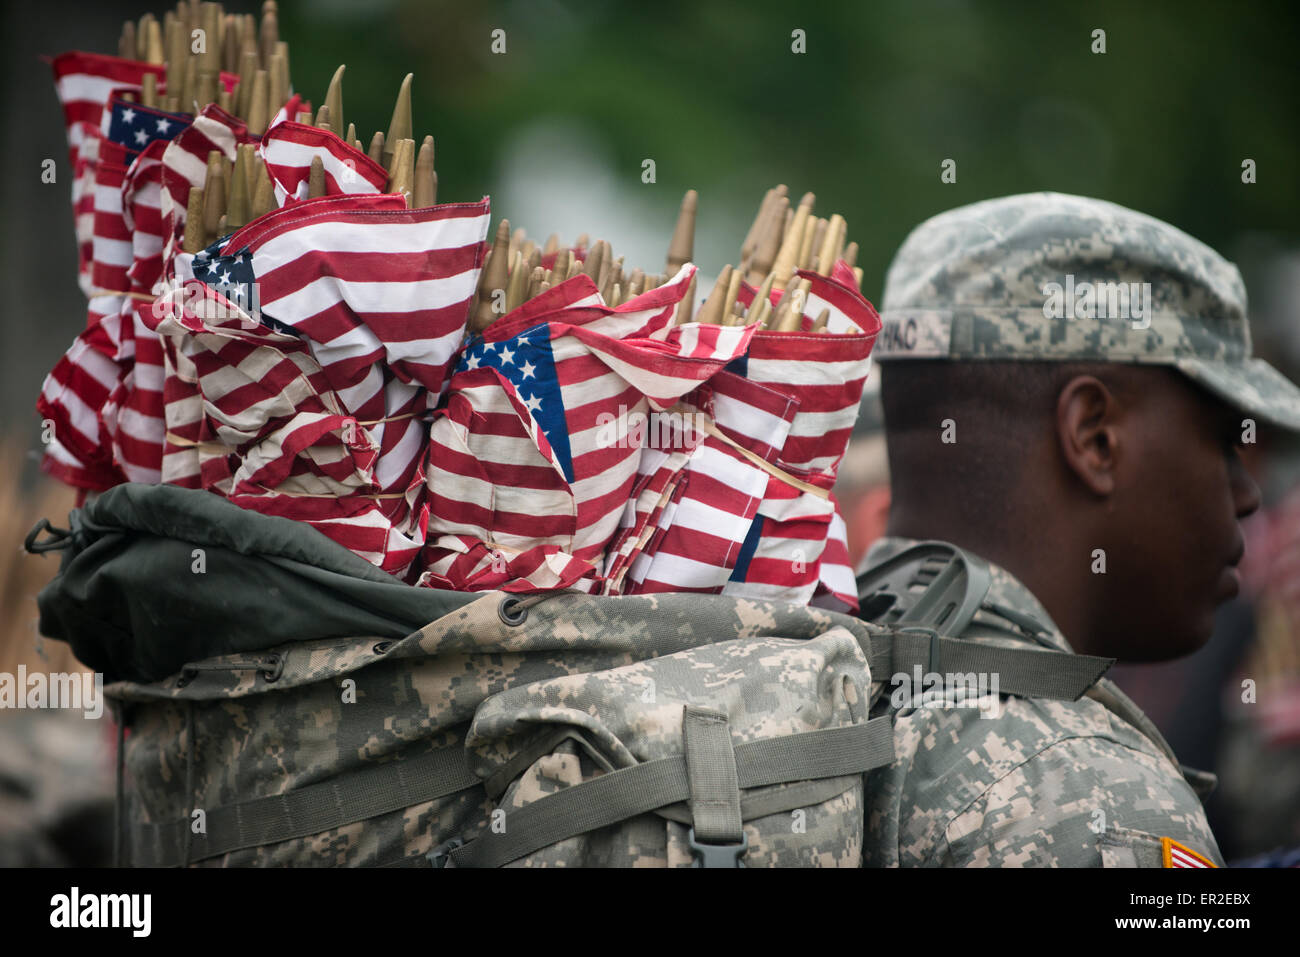 A US Army soldier from the Old Guard carries a bag of  flags to place on grave sites in honor of Memorial Day at Arlington National Cemetery May 21, 2015 in Arlington, Virginia. The Old Guard has conducted Flags-in, when an American flag is placed at every headstone, since 1948. Stock Photo